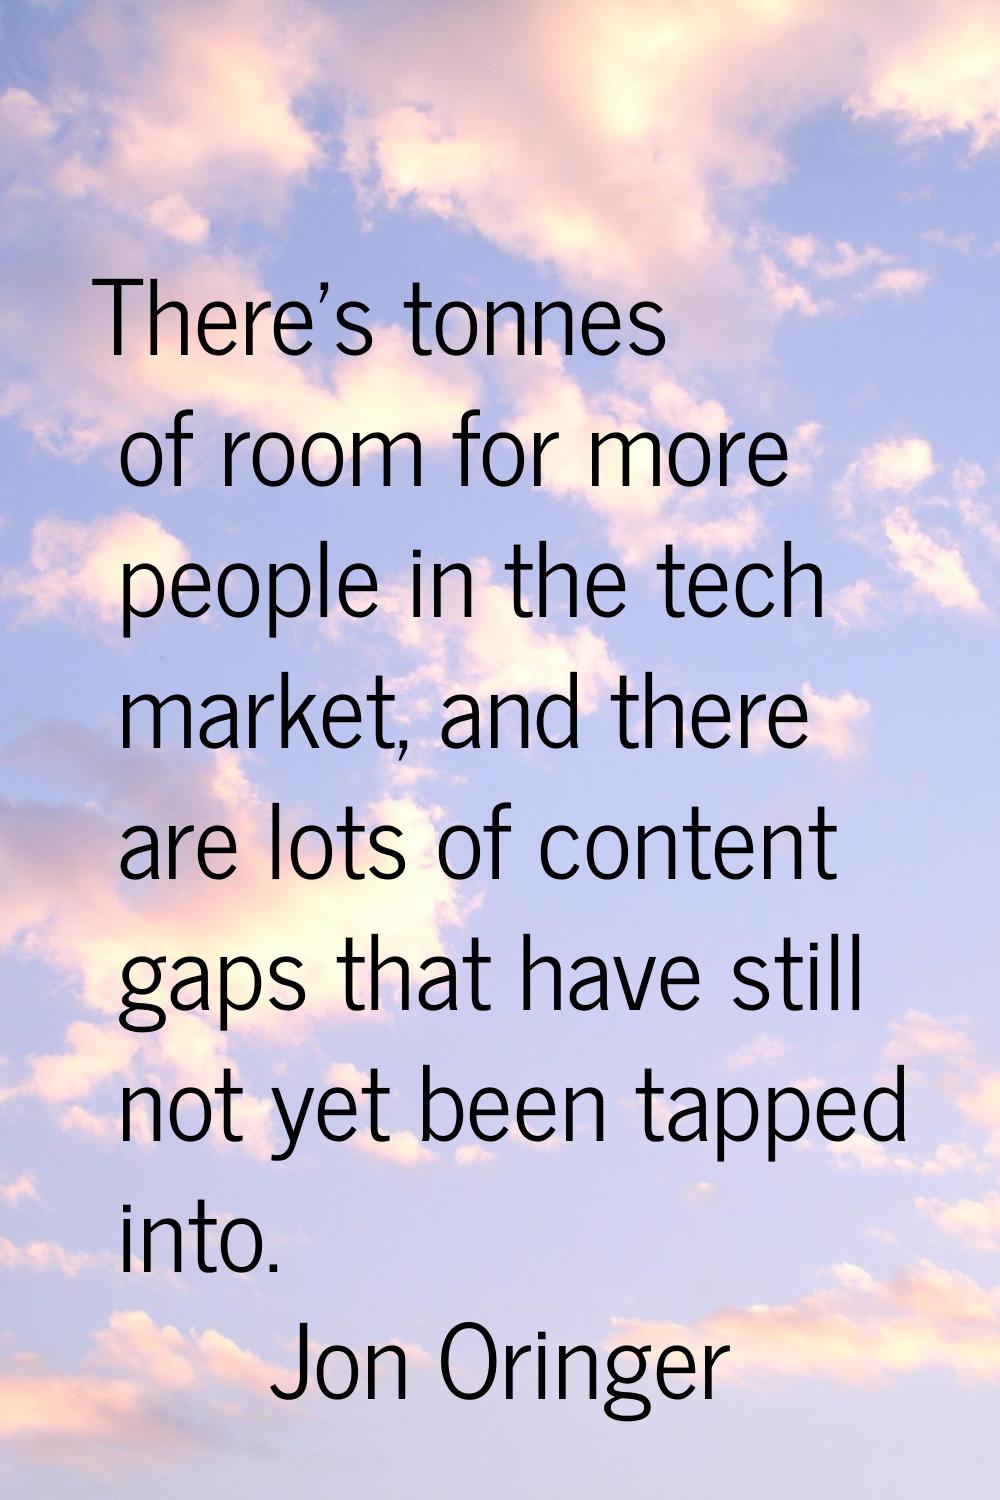 There's tonnes of room for more people in the tech market, and there are lots of content gaps that 